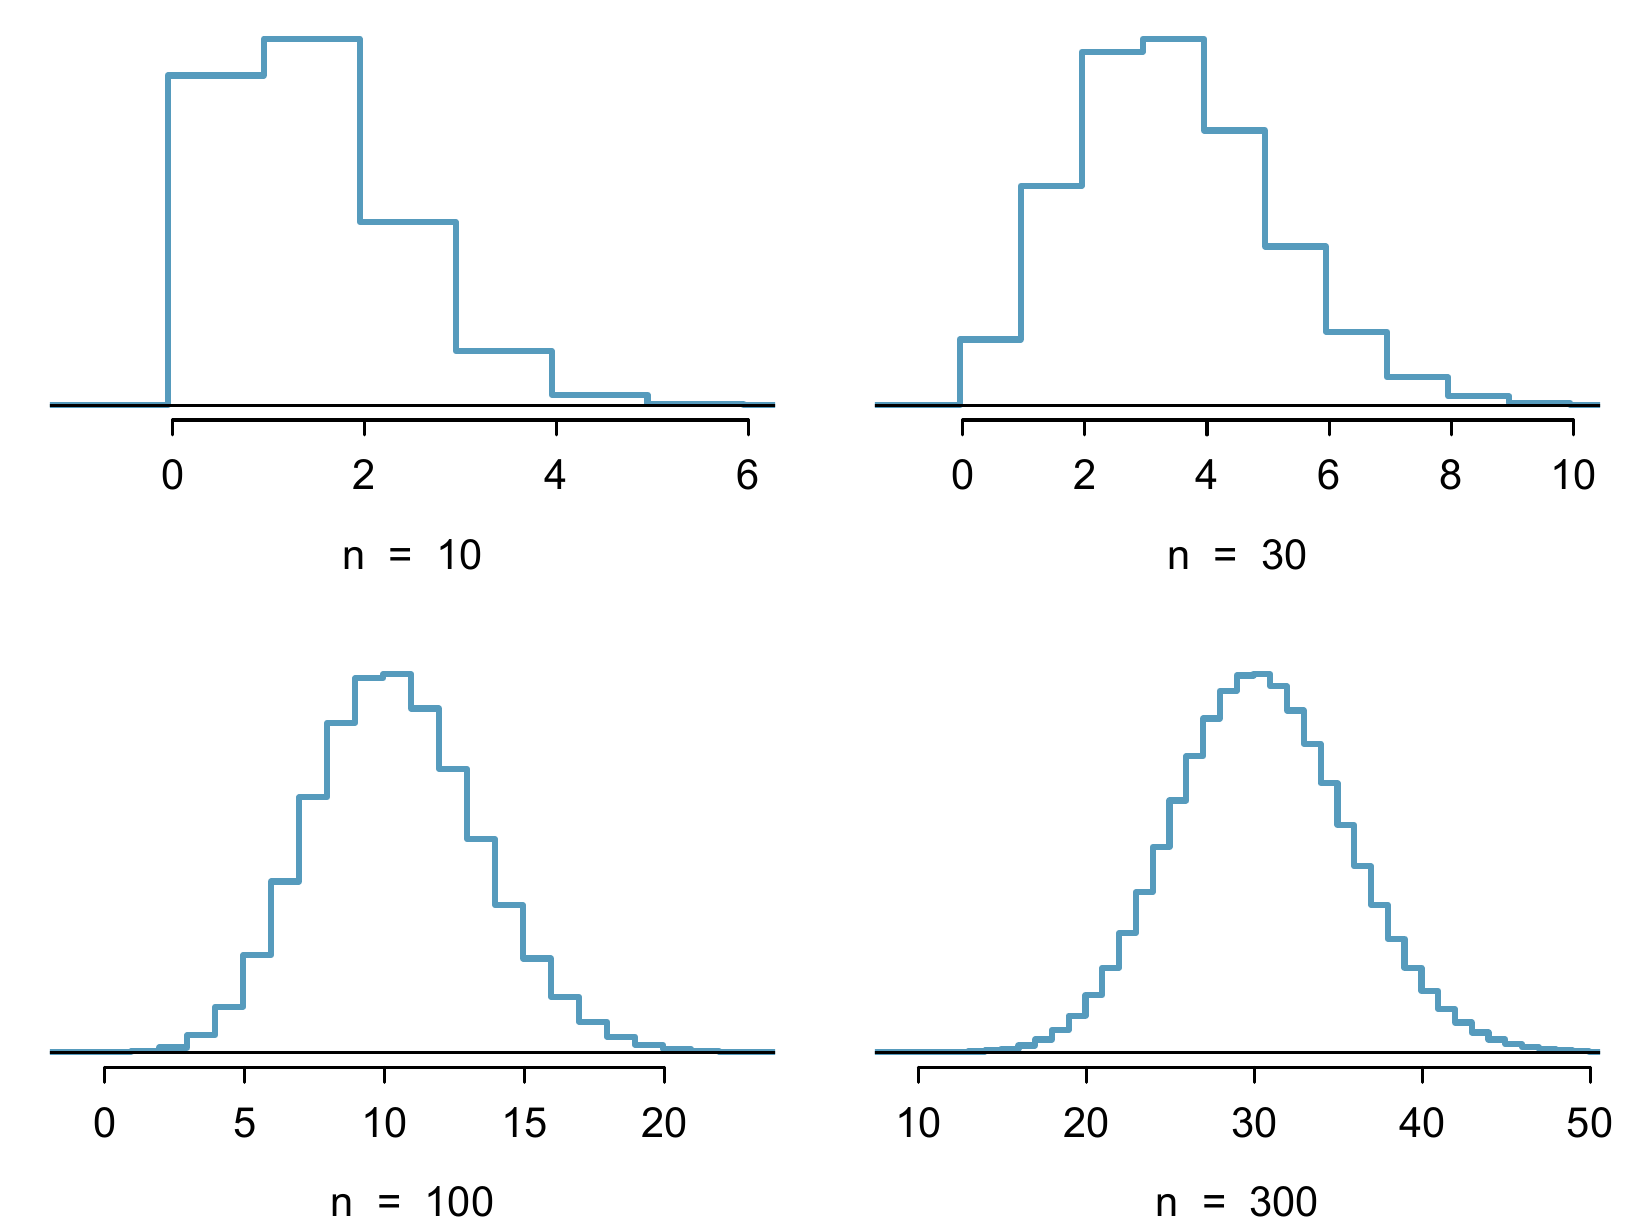 Hollow histograms of samples from the binomial model when $p=0.10$. The sample sizes for the four plots are $n=10$, 30, 100, and 300, respectively.